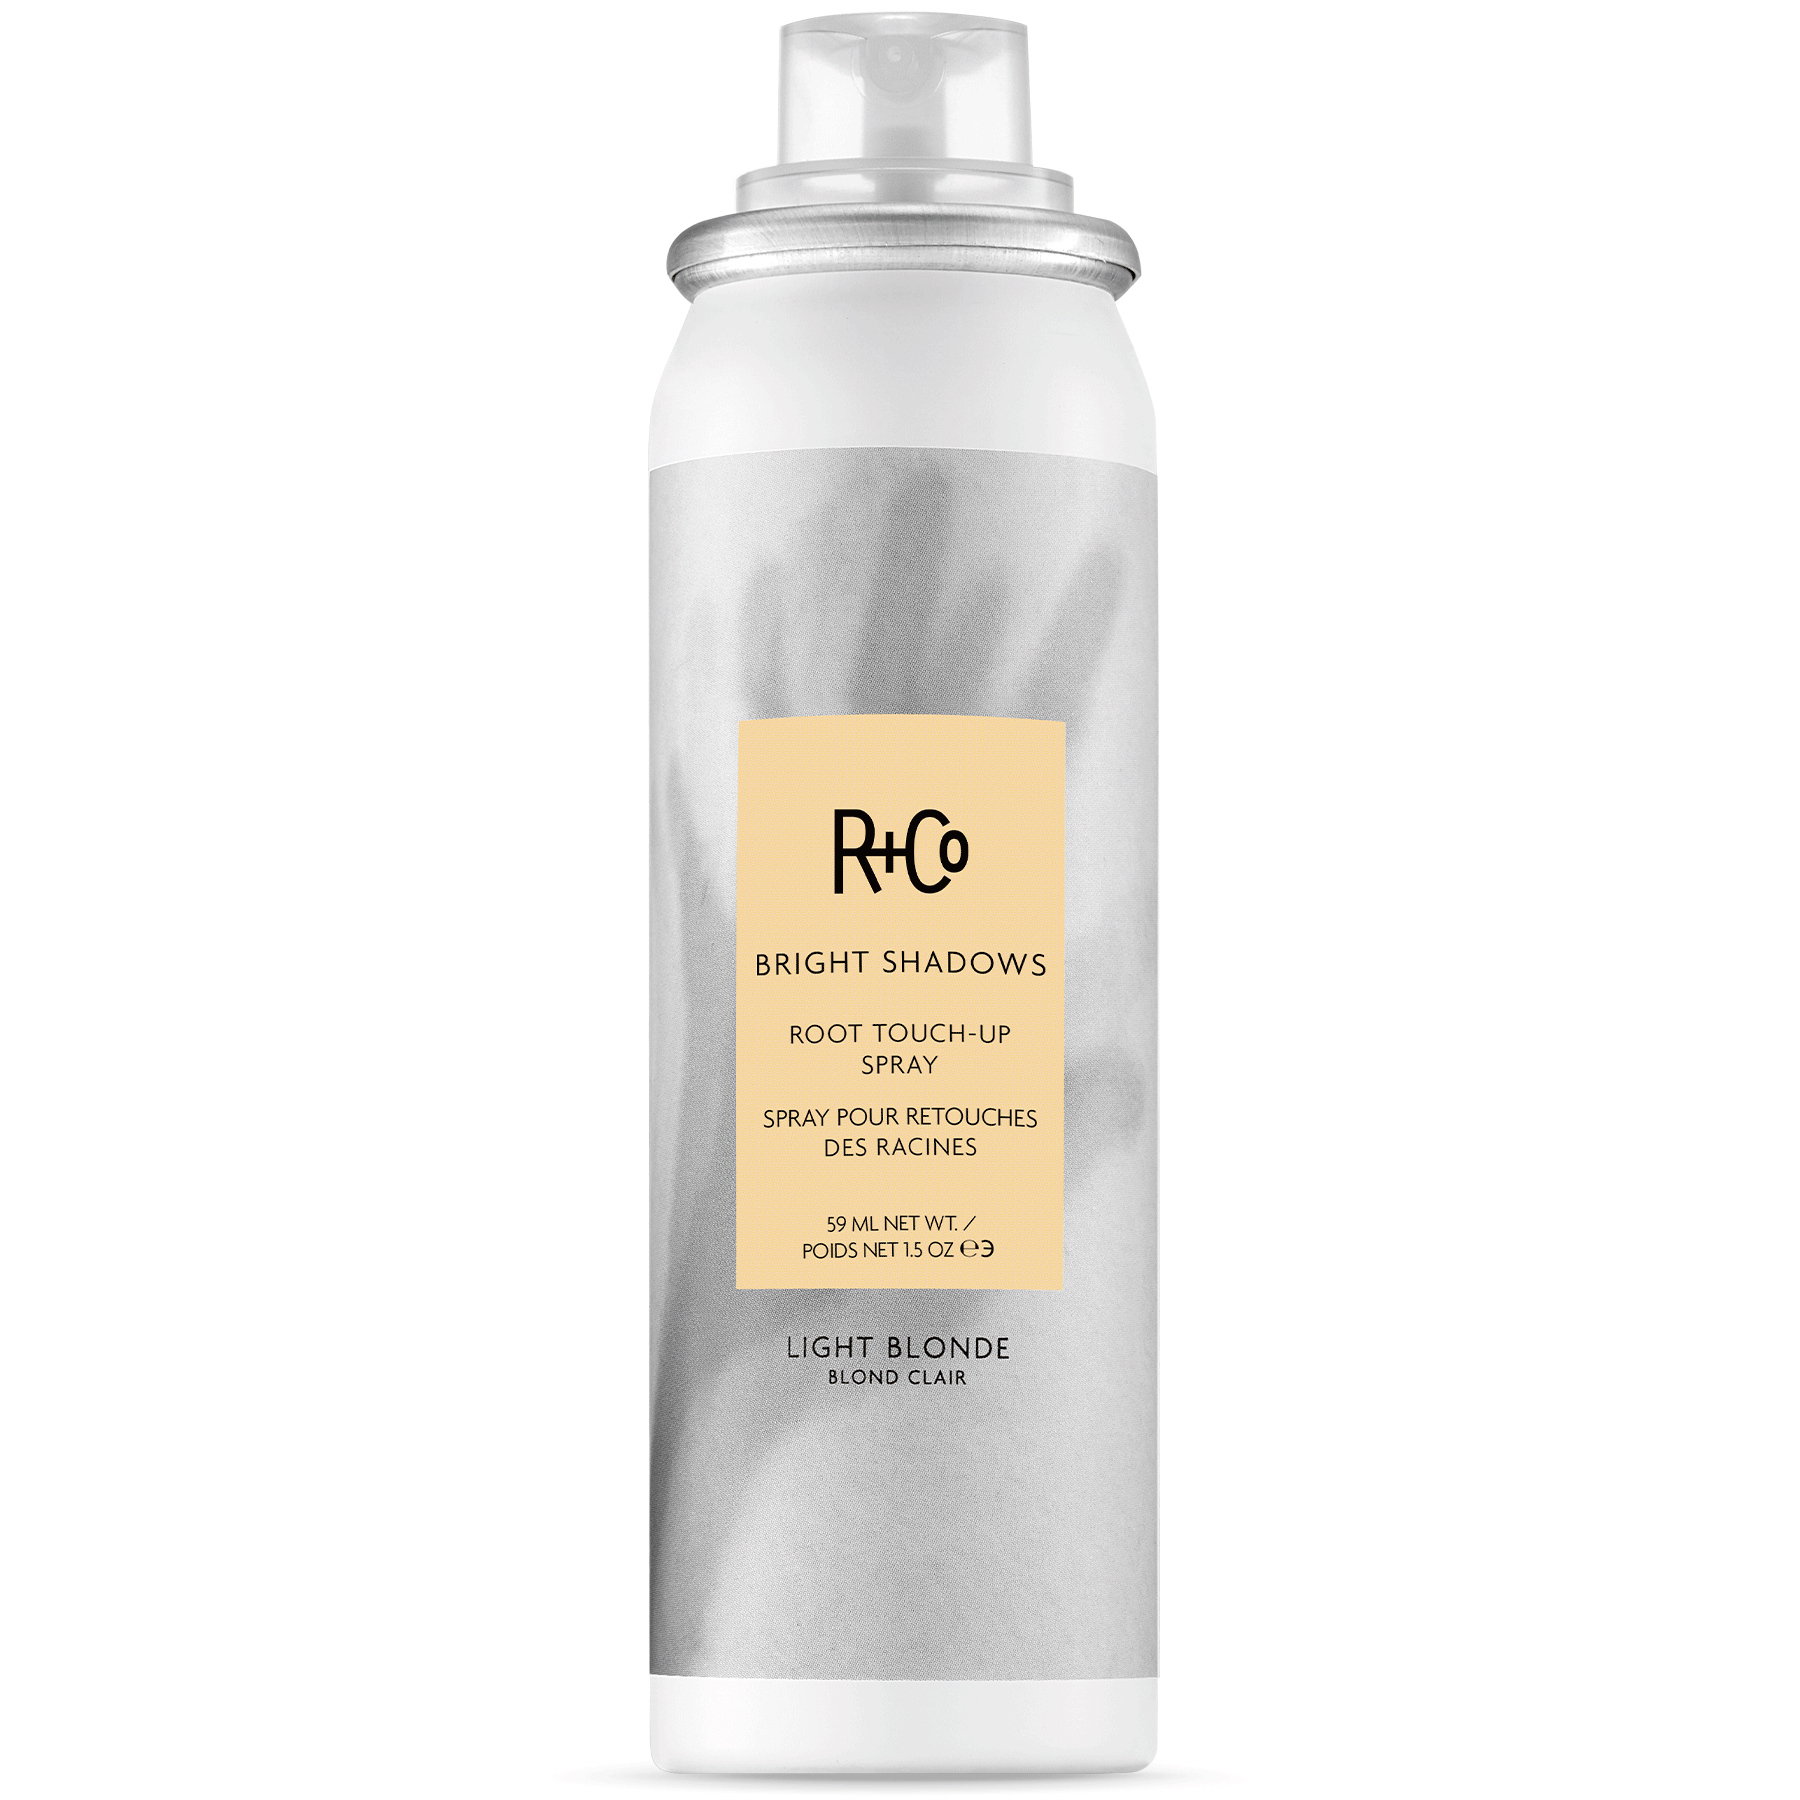 R+CO Bright Shadows Root Touch-Up Spray - Light Blonde (59 ml)